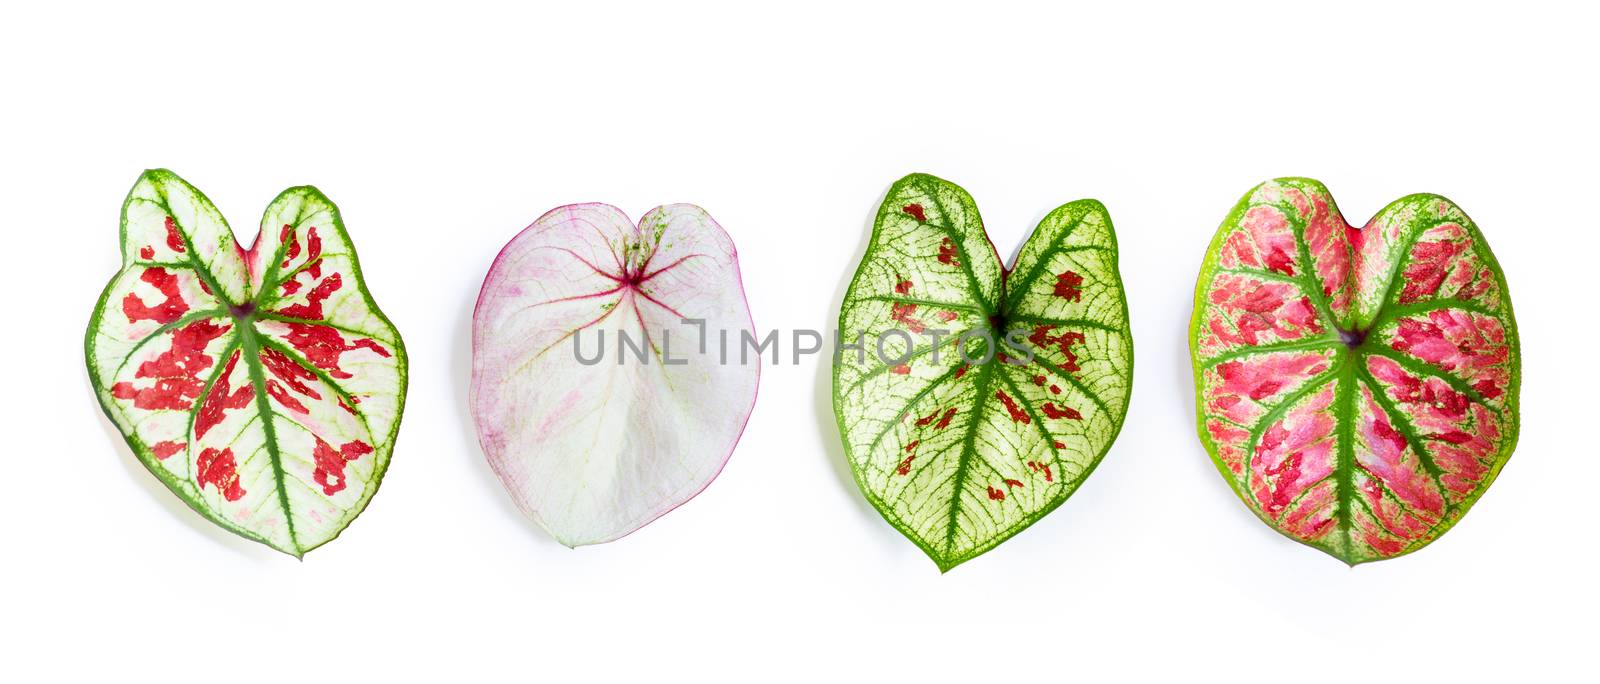 Caladium leaves on white background. Top view by Bowonpat